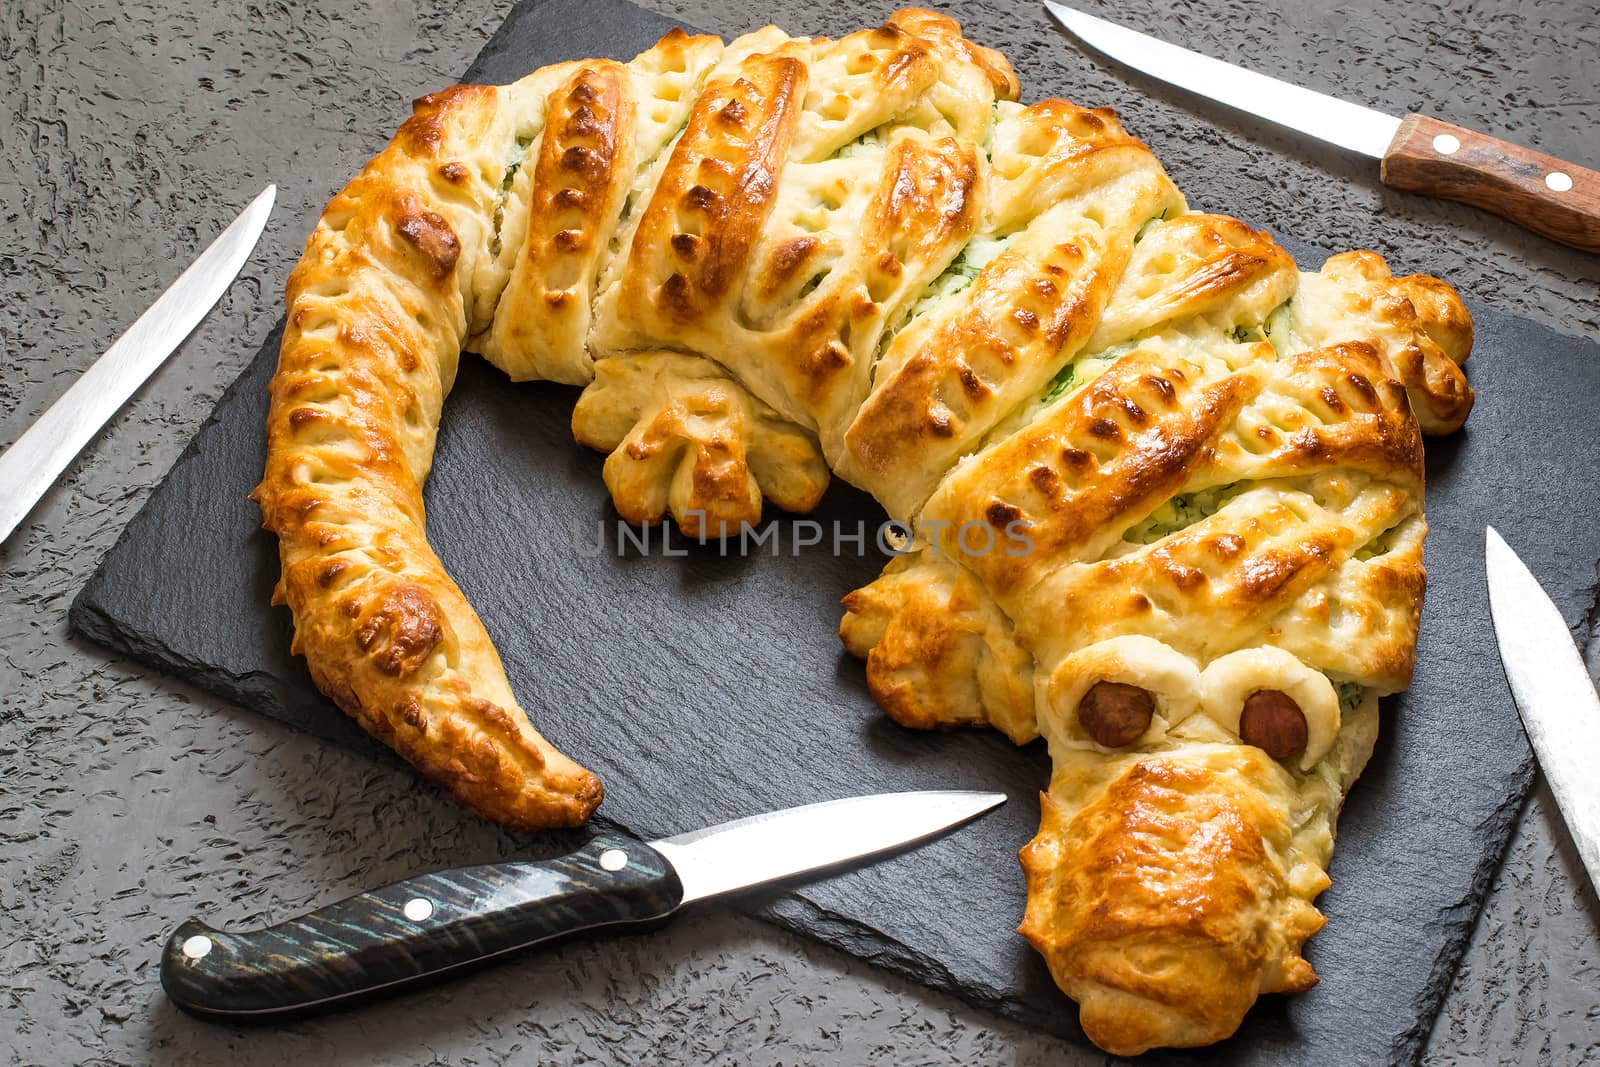 Original cake in form of crocodile with potatoes, cheese and herbs and knives. Cake is served to Halloween party as fun and spooky monster